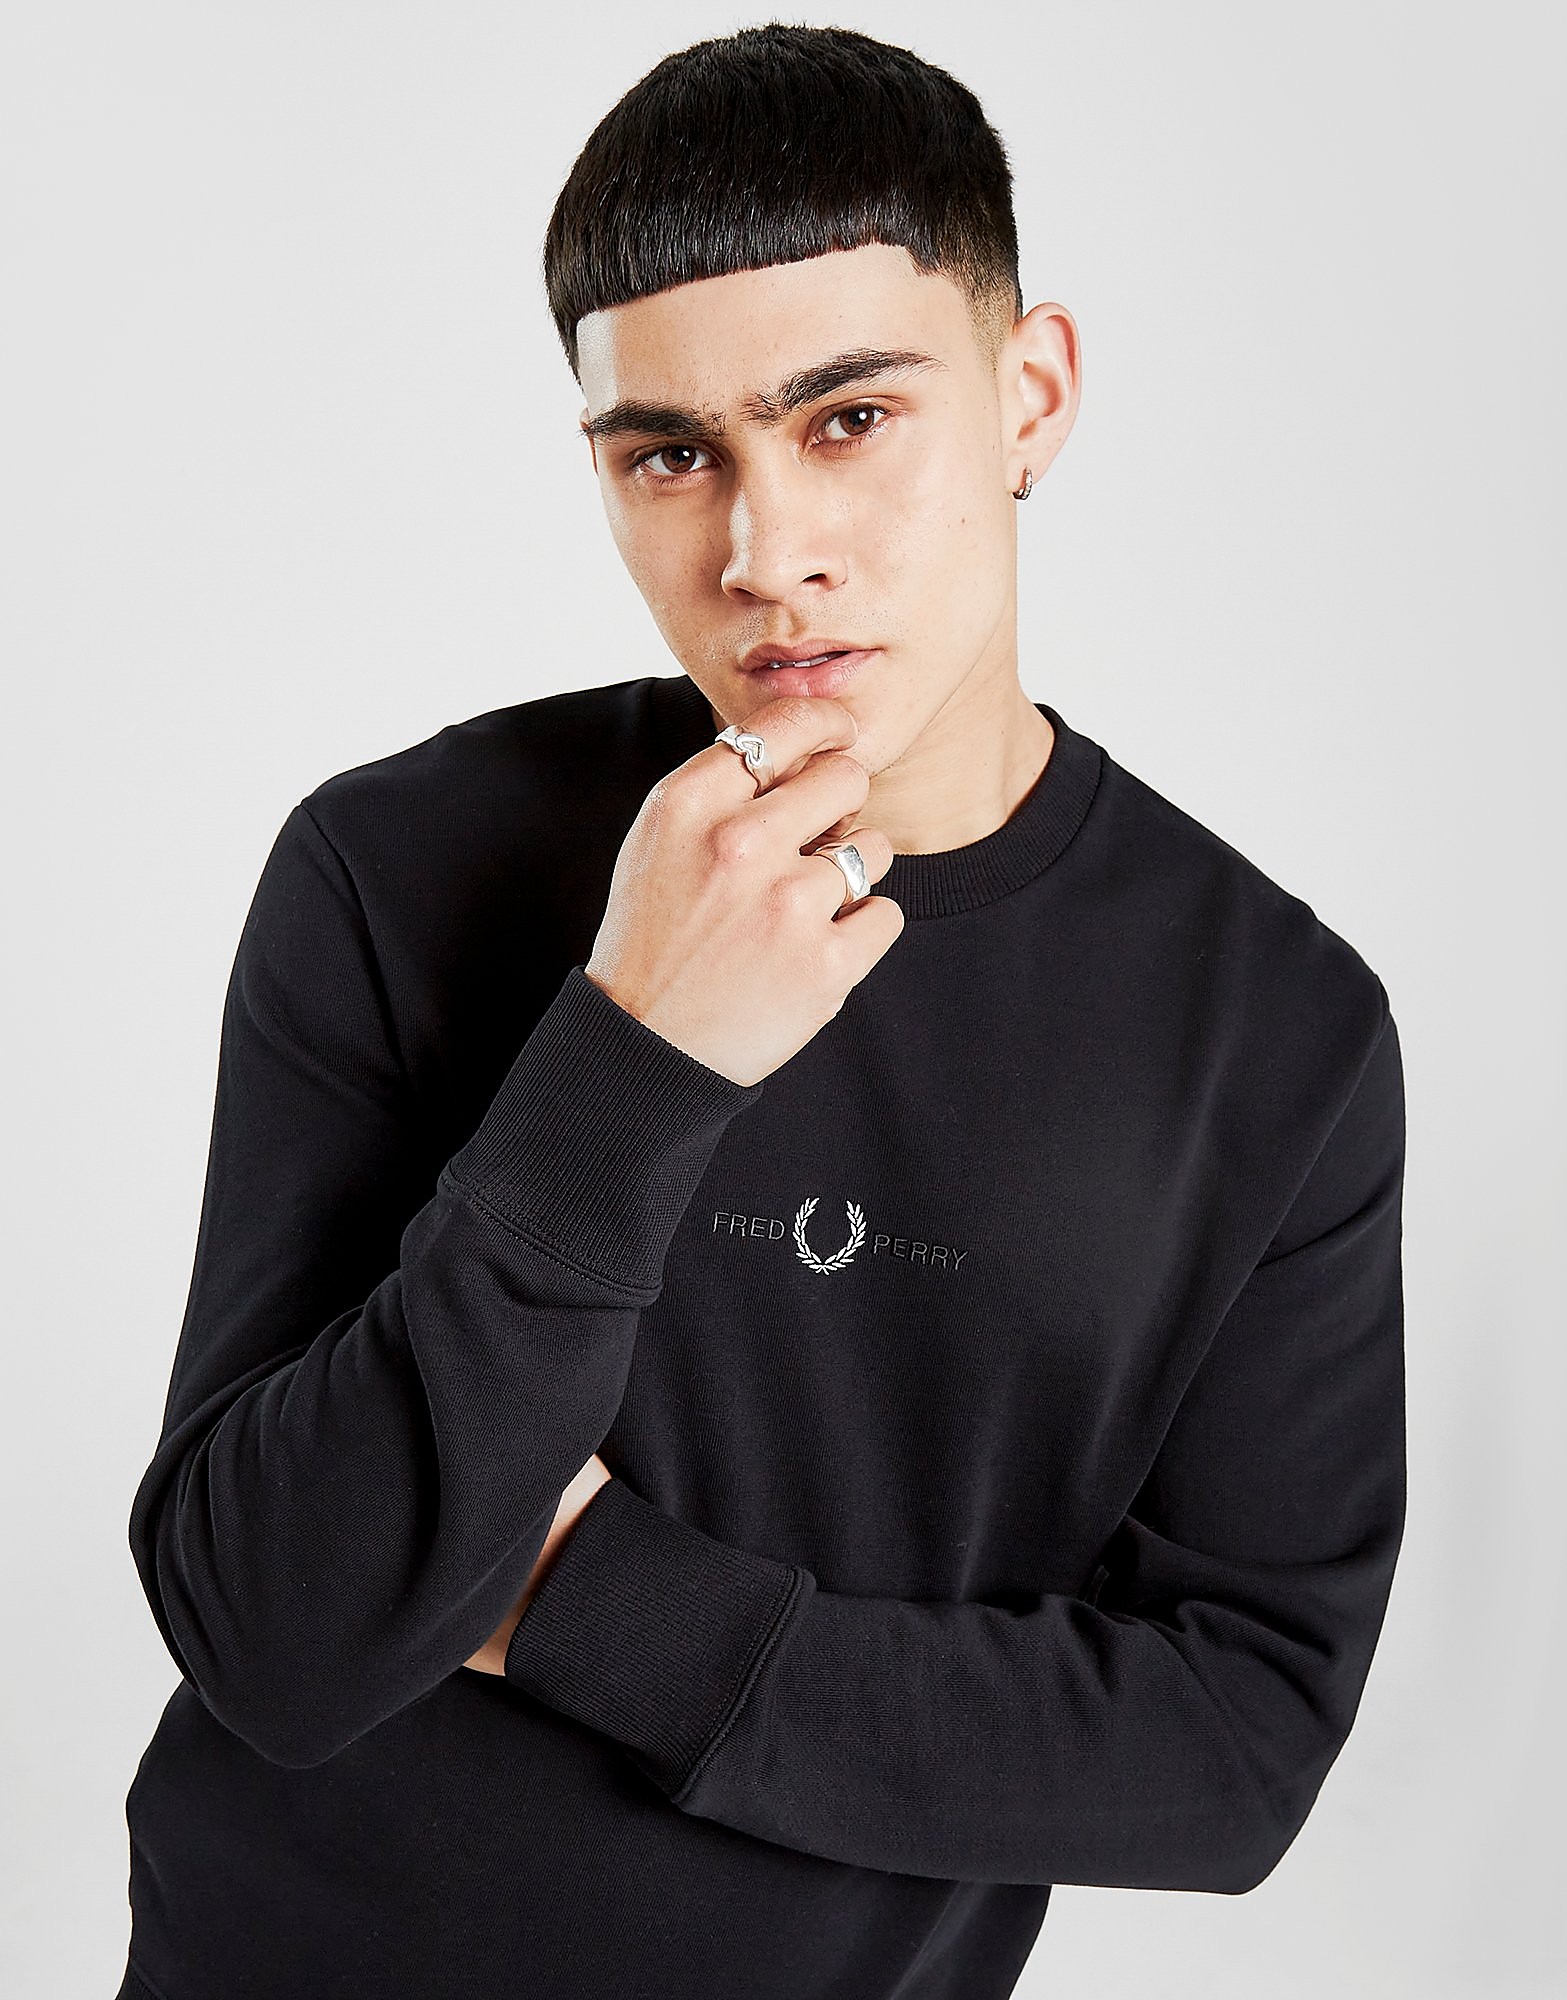 Fred perry collegepaita miehet - only at jd - mens, musta, fred perry